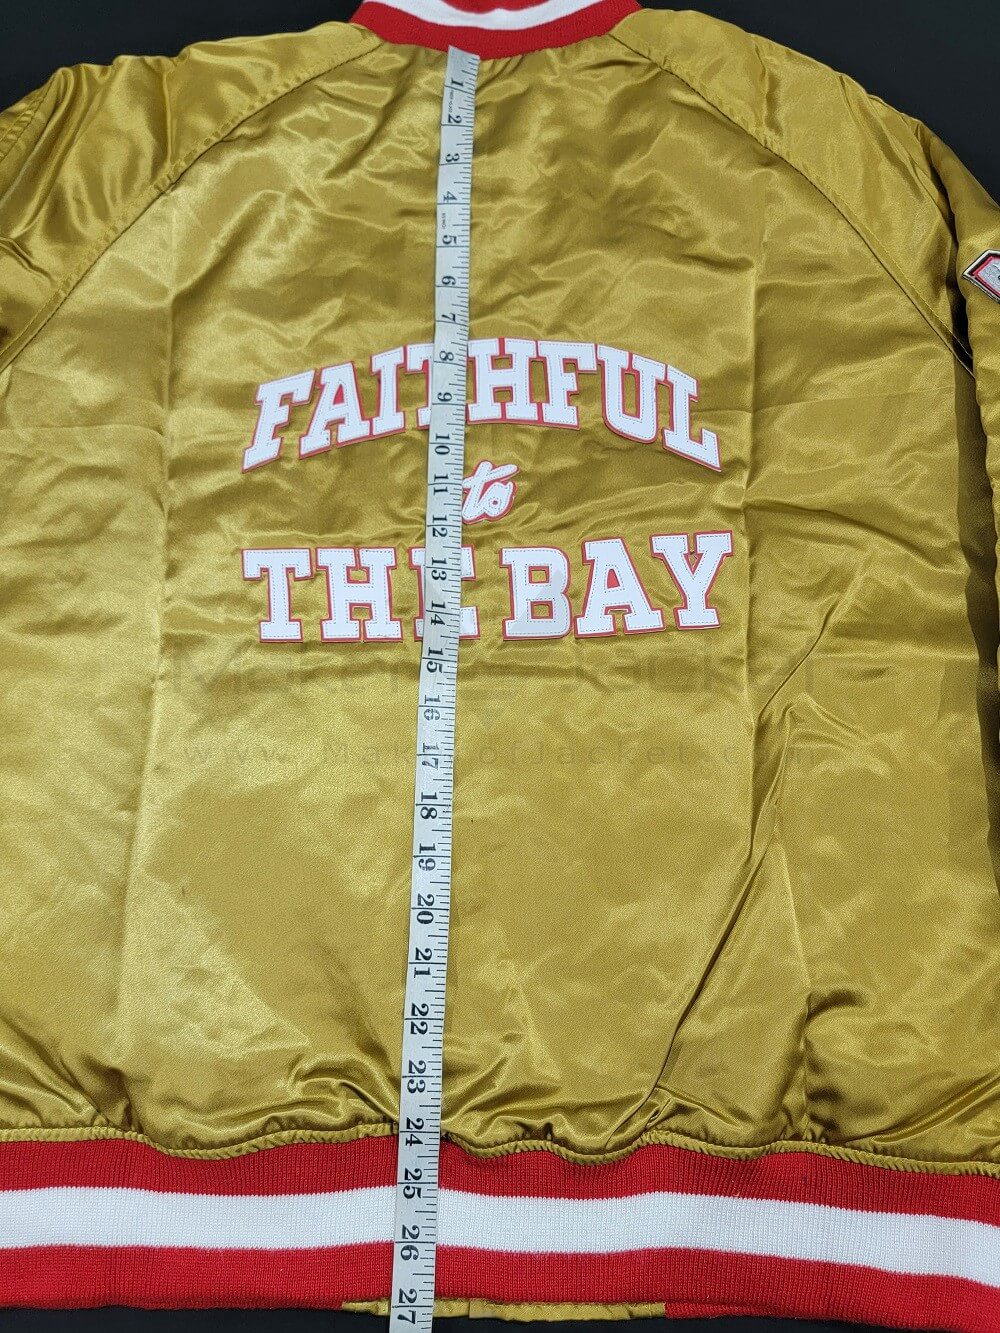 SF 49ers Faithful To The Bay Jacket Size Men's XL - Maker of Jacket